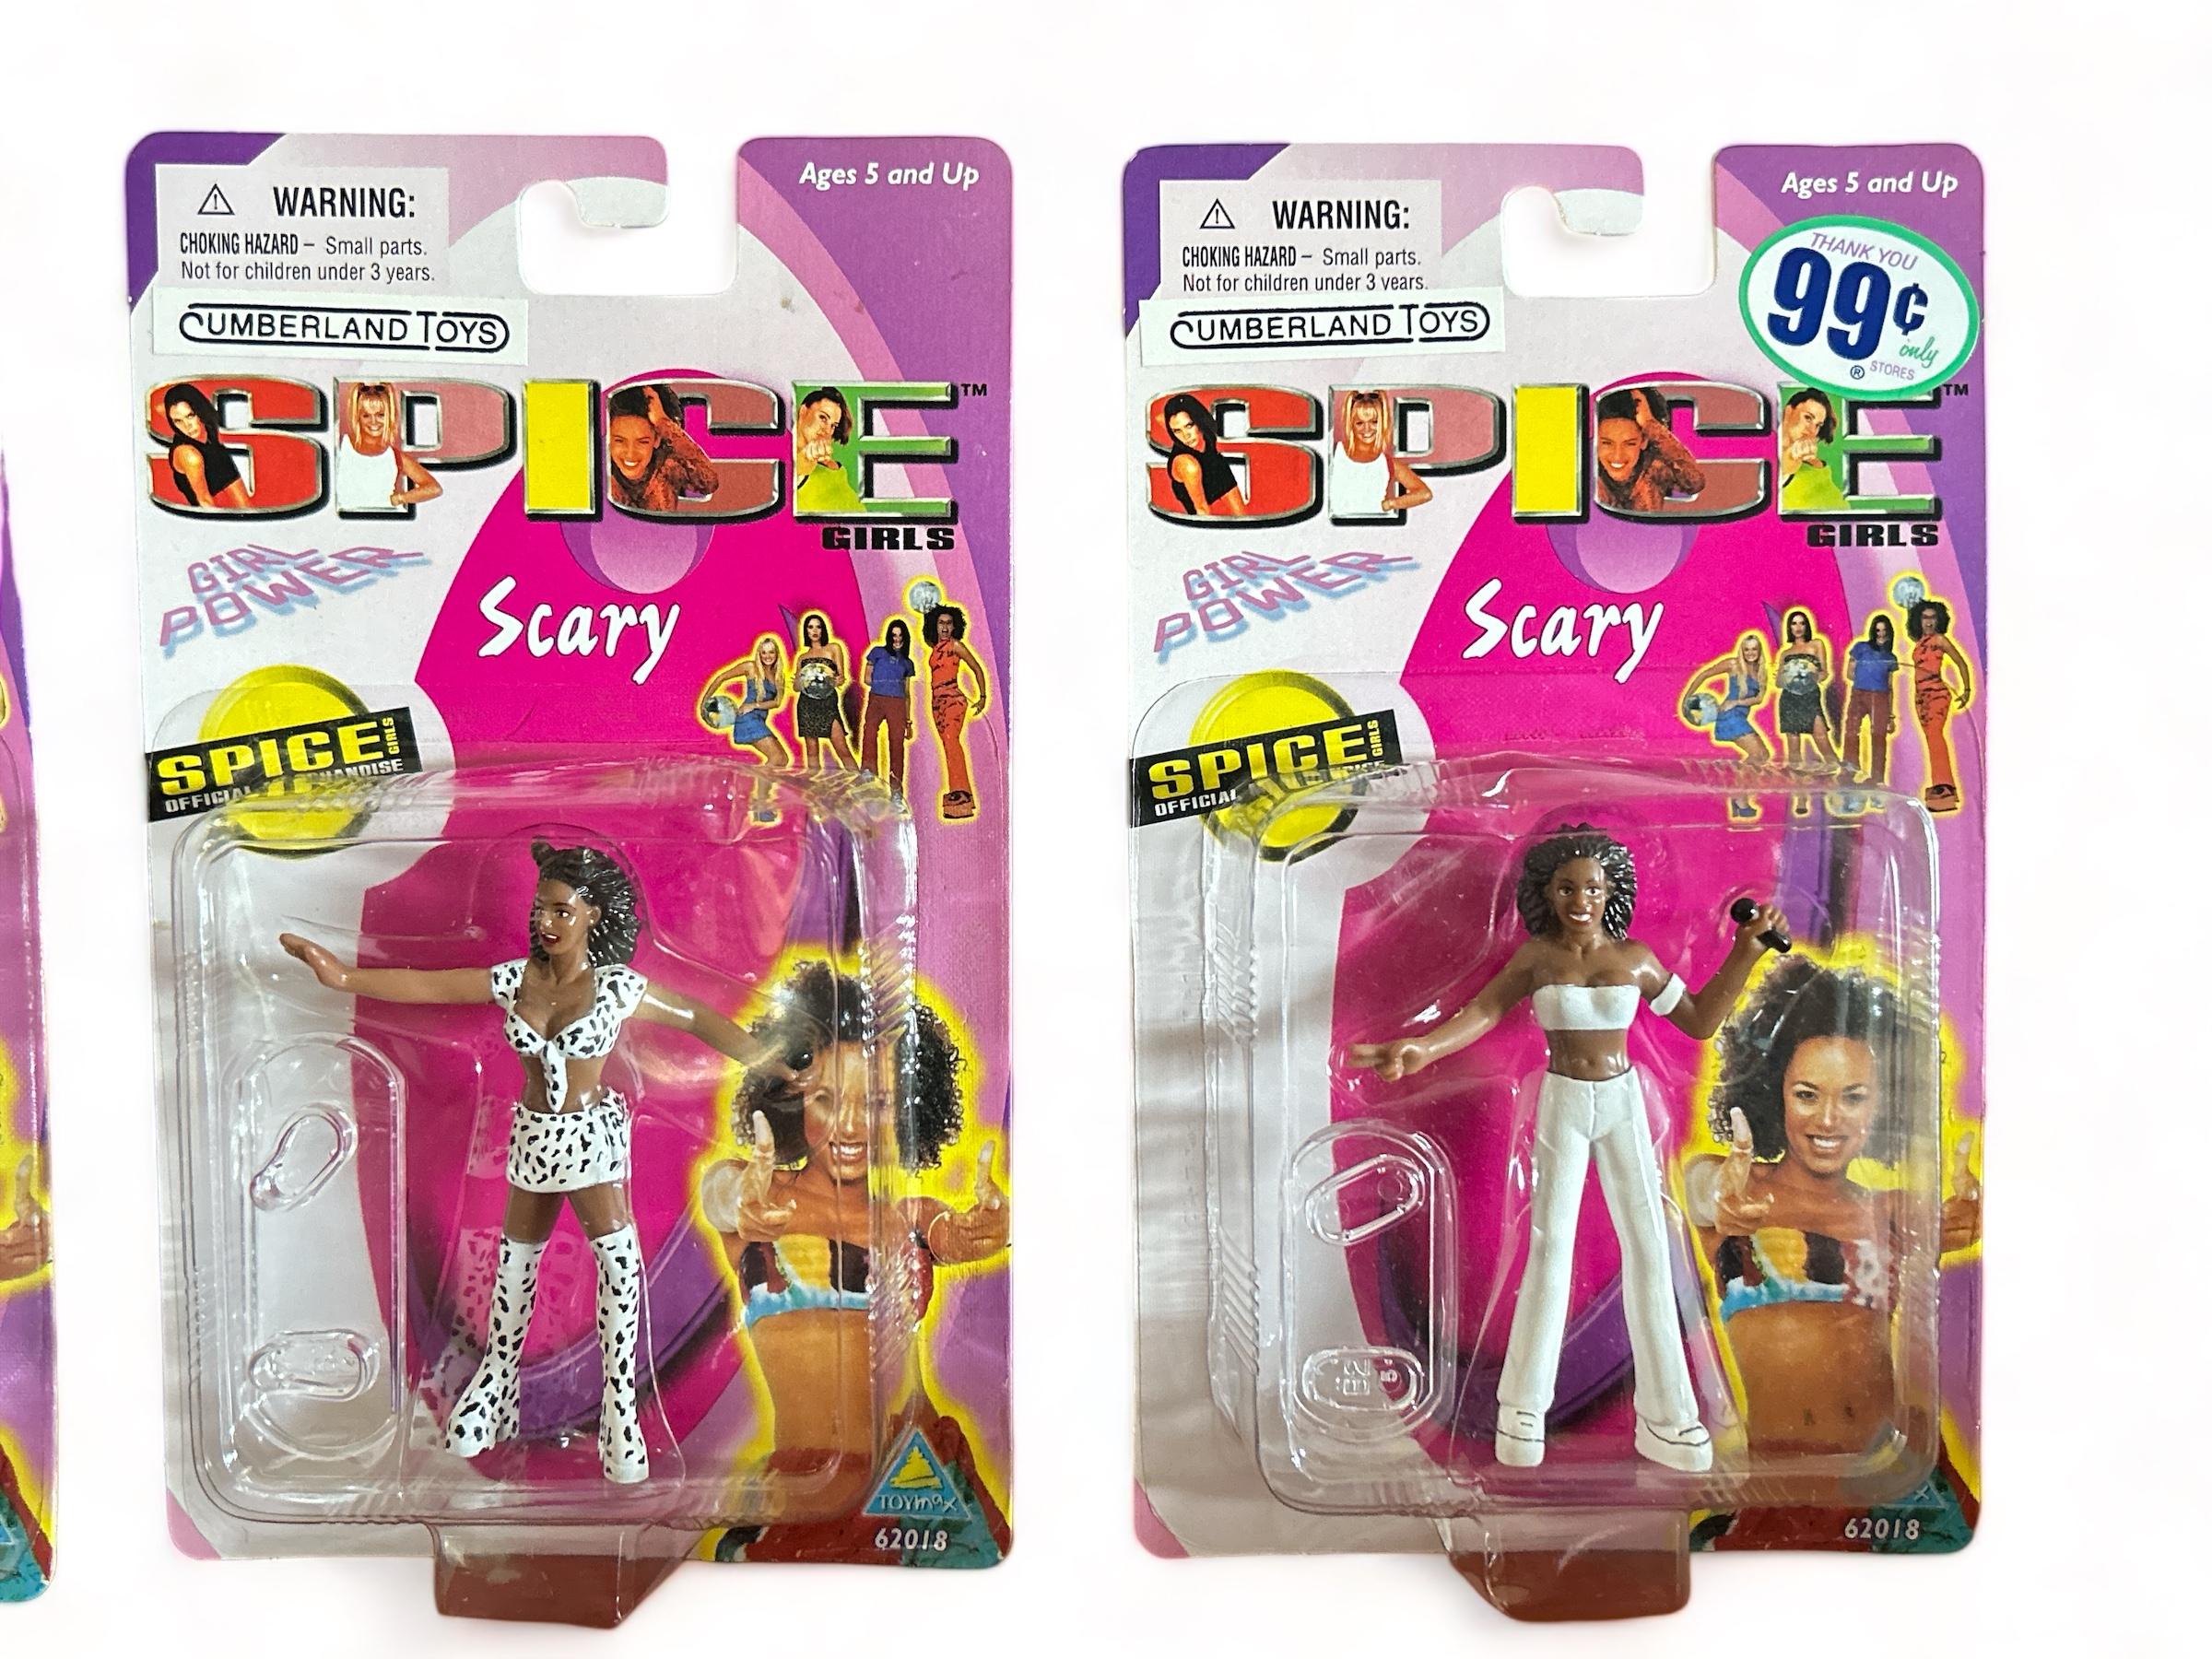 Four Spice Girls "Scary Spice" 3" figures